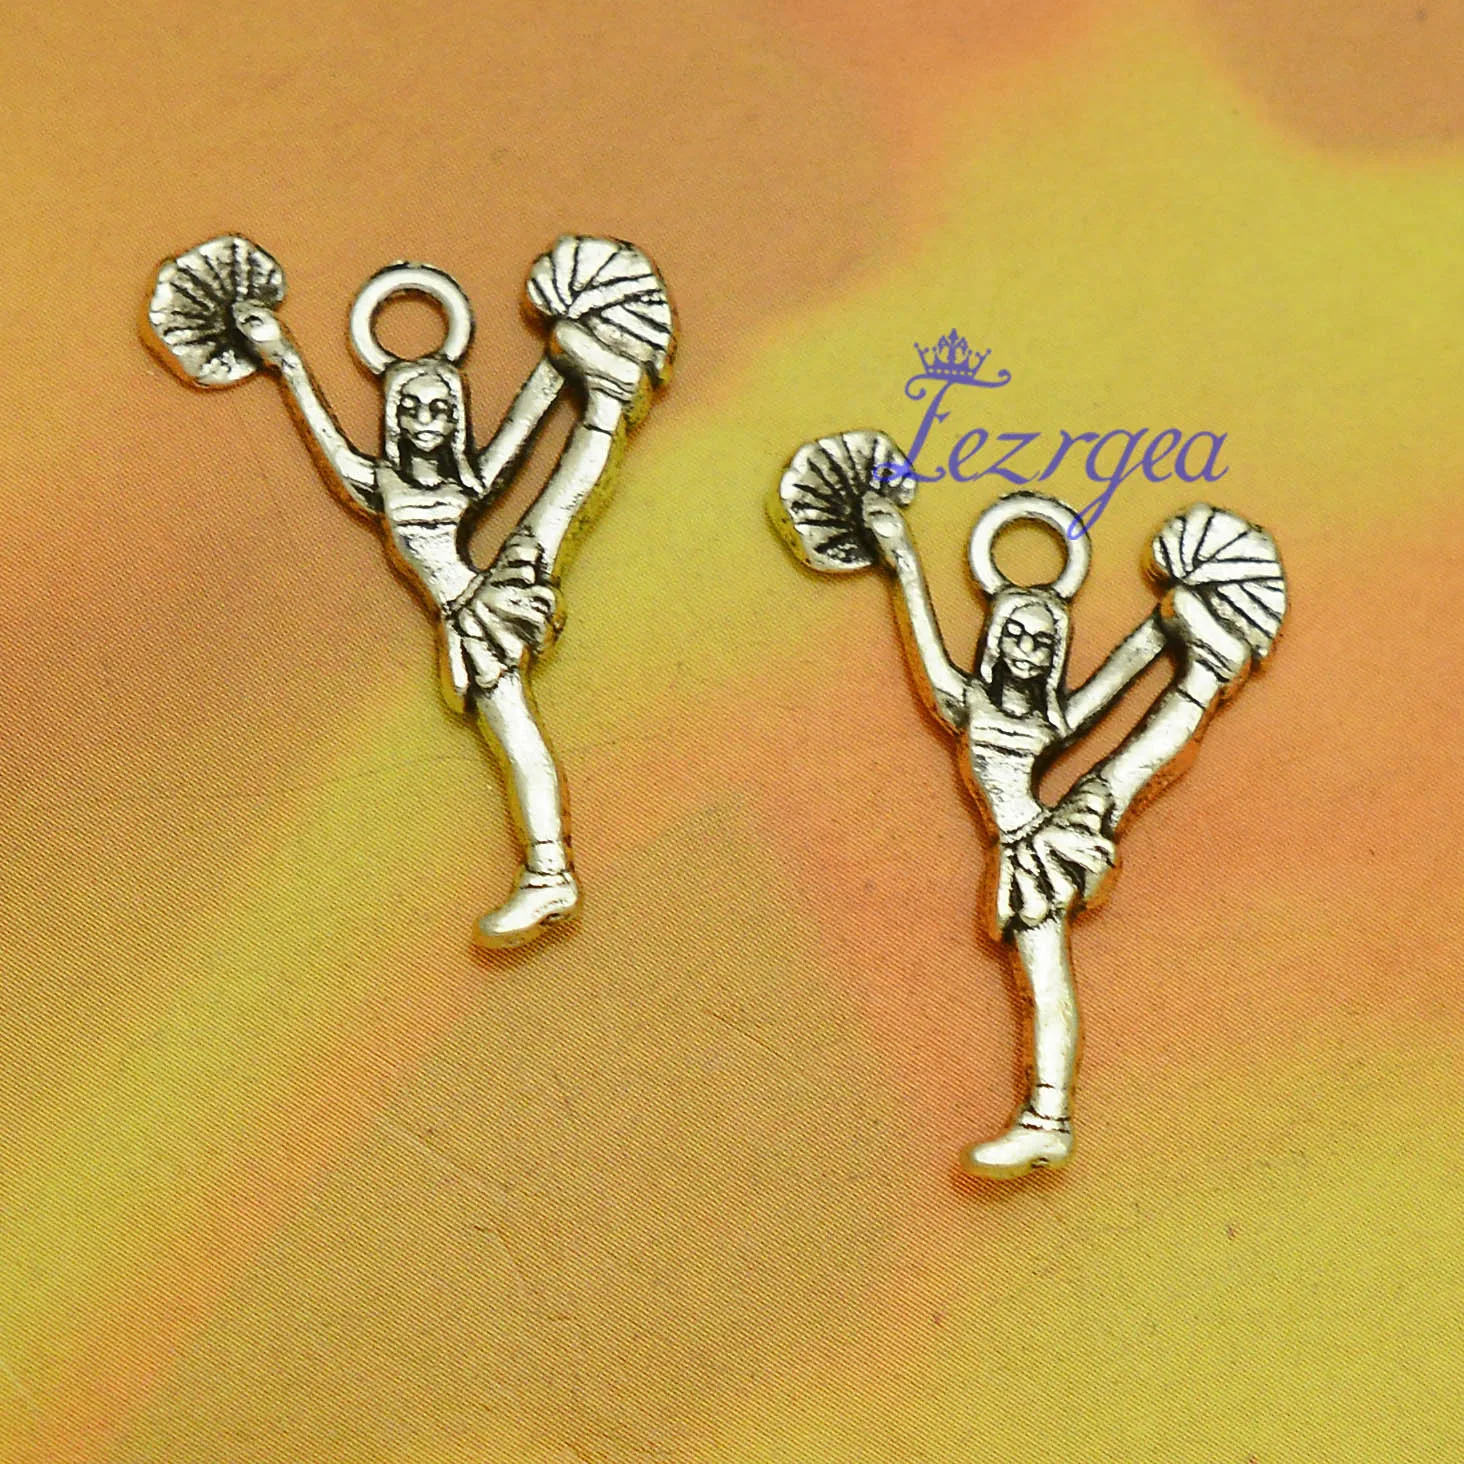 40pcs/lot--26x17mm, Cheerleaders chams,Antique silver plated Dancing Cheerleaders charms,DIY supplies,Jewelry accessories